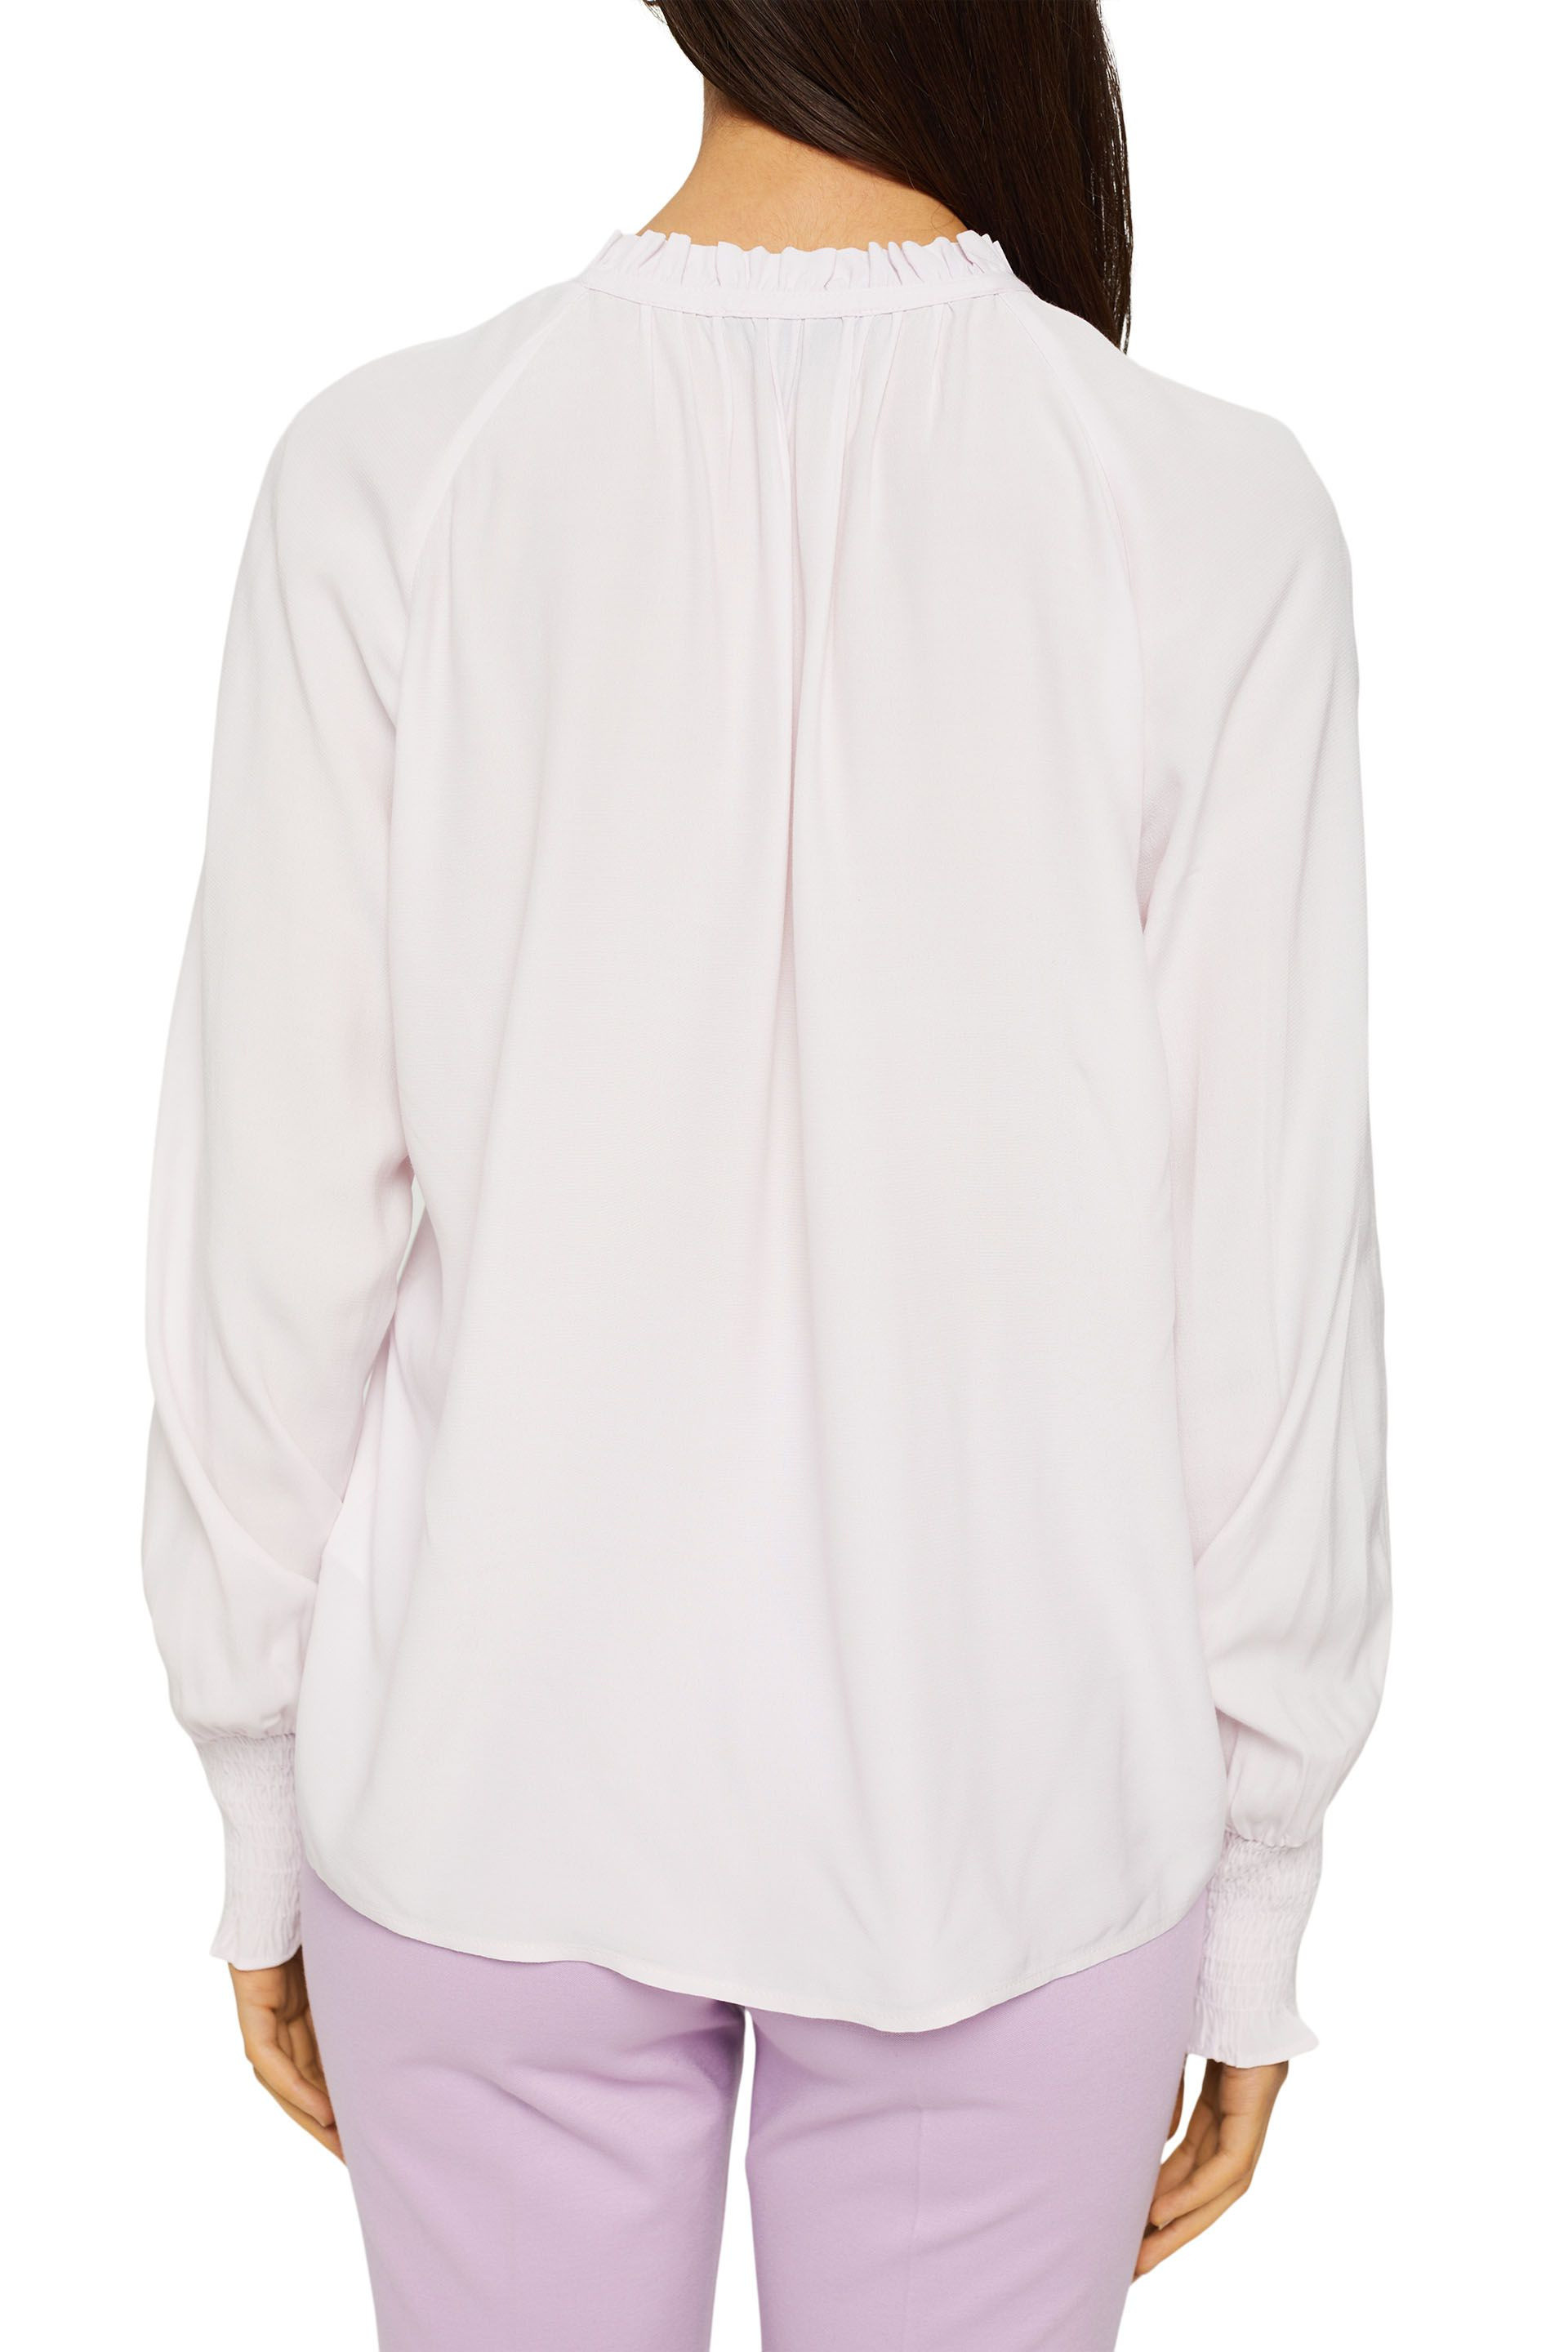 Shirt with ruffles and gathering, Light Pink, large image number 2